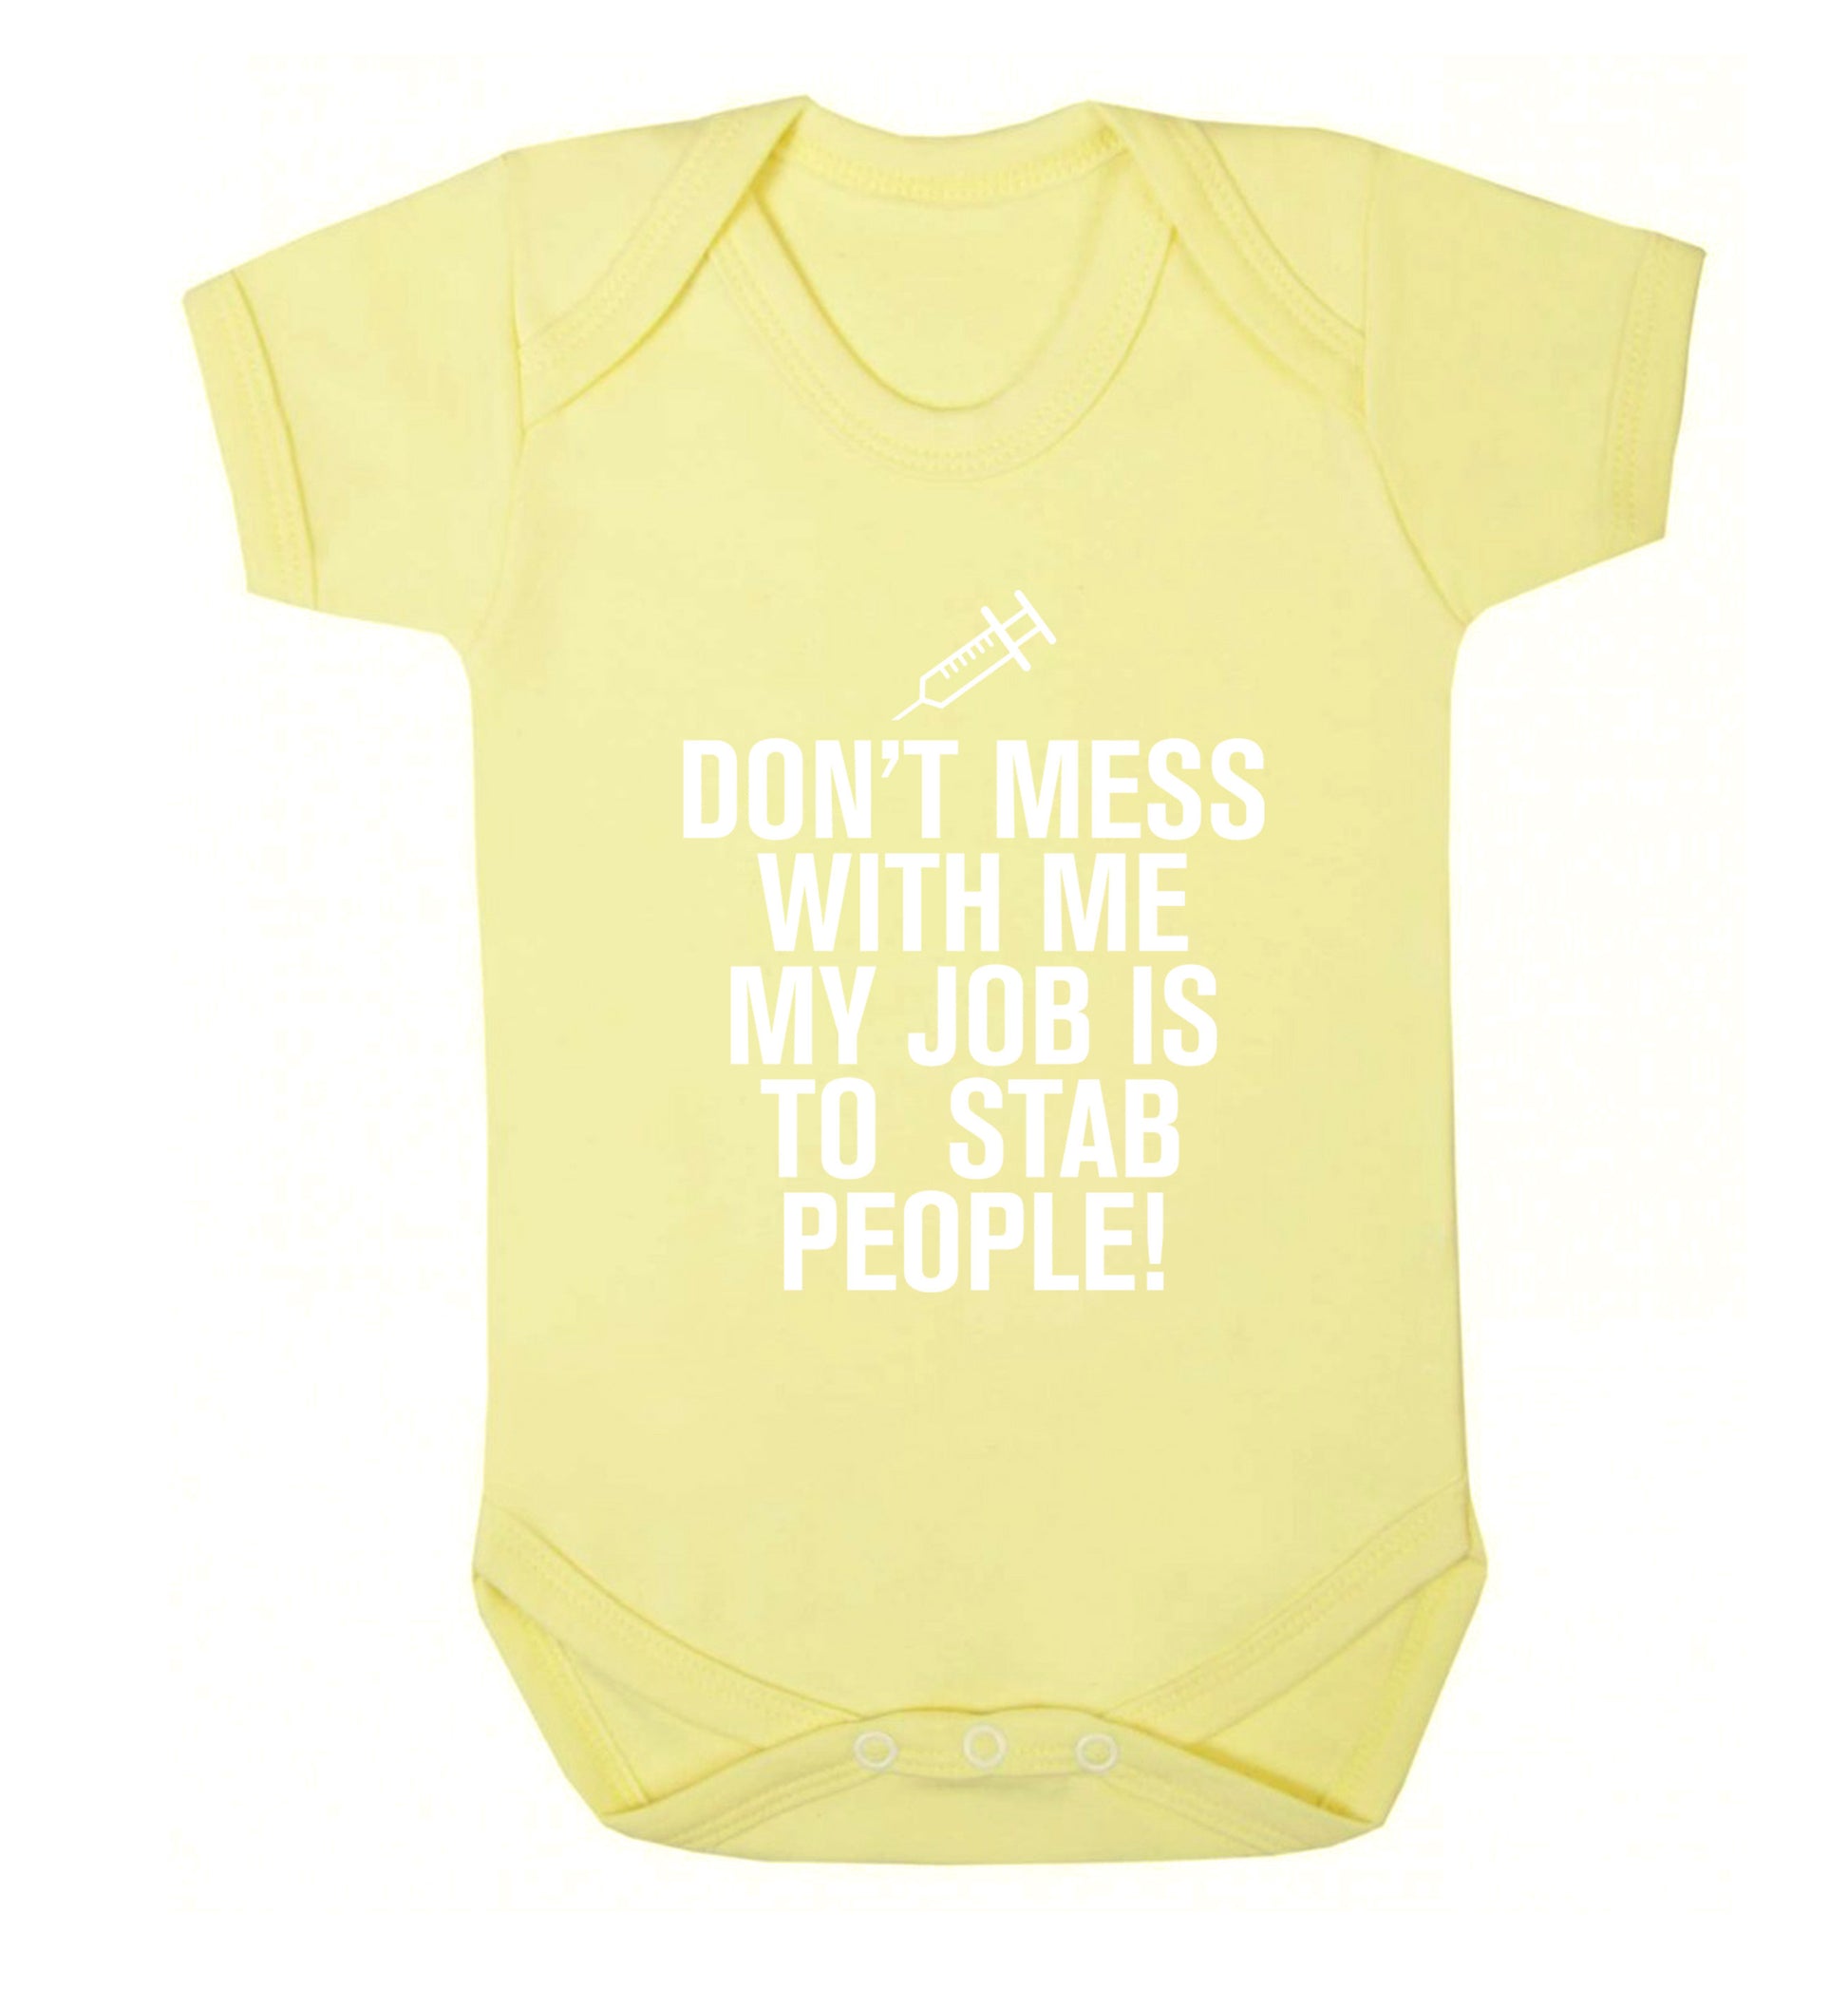 Don't mess with me my job is to stab people! Baby Vest pale yellow 18-24 months